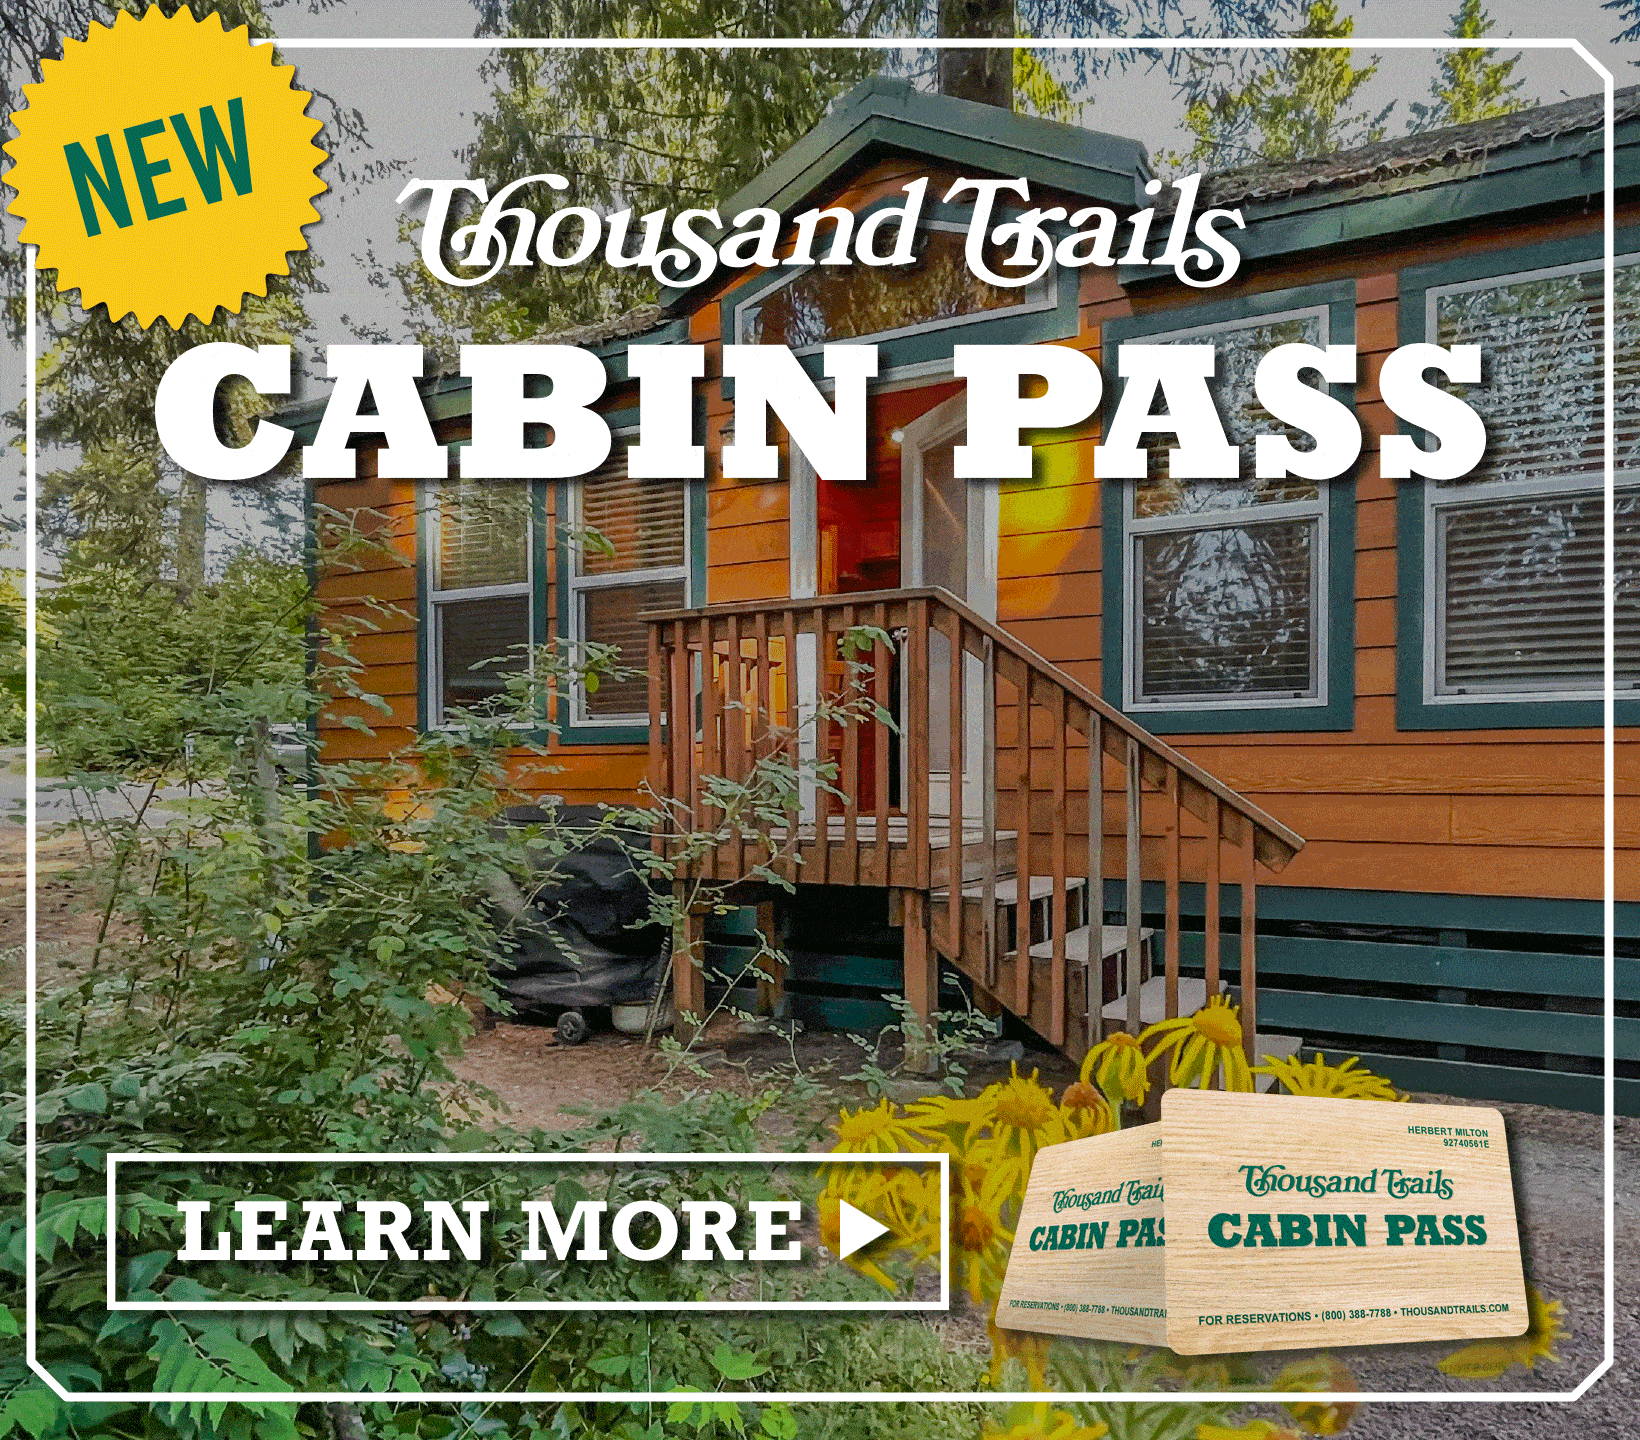 NEW! Thousand Trails Cabin Pass - Learn More!